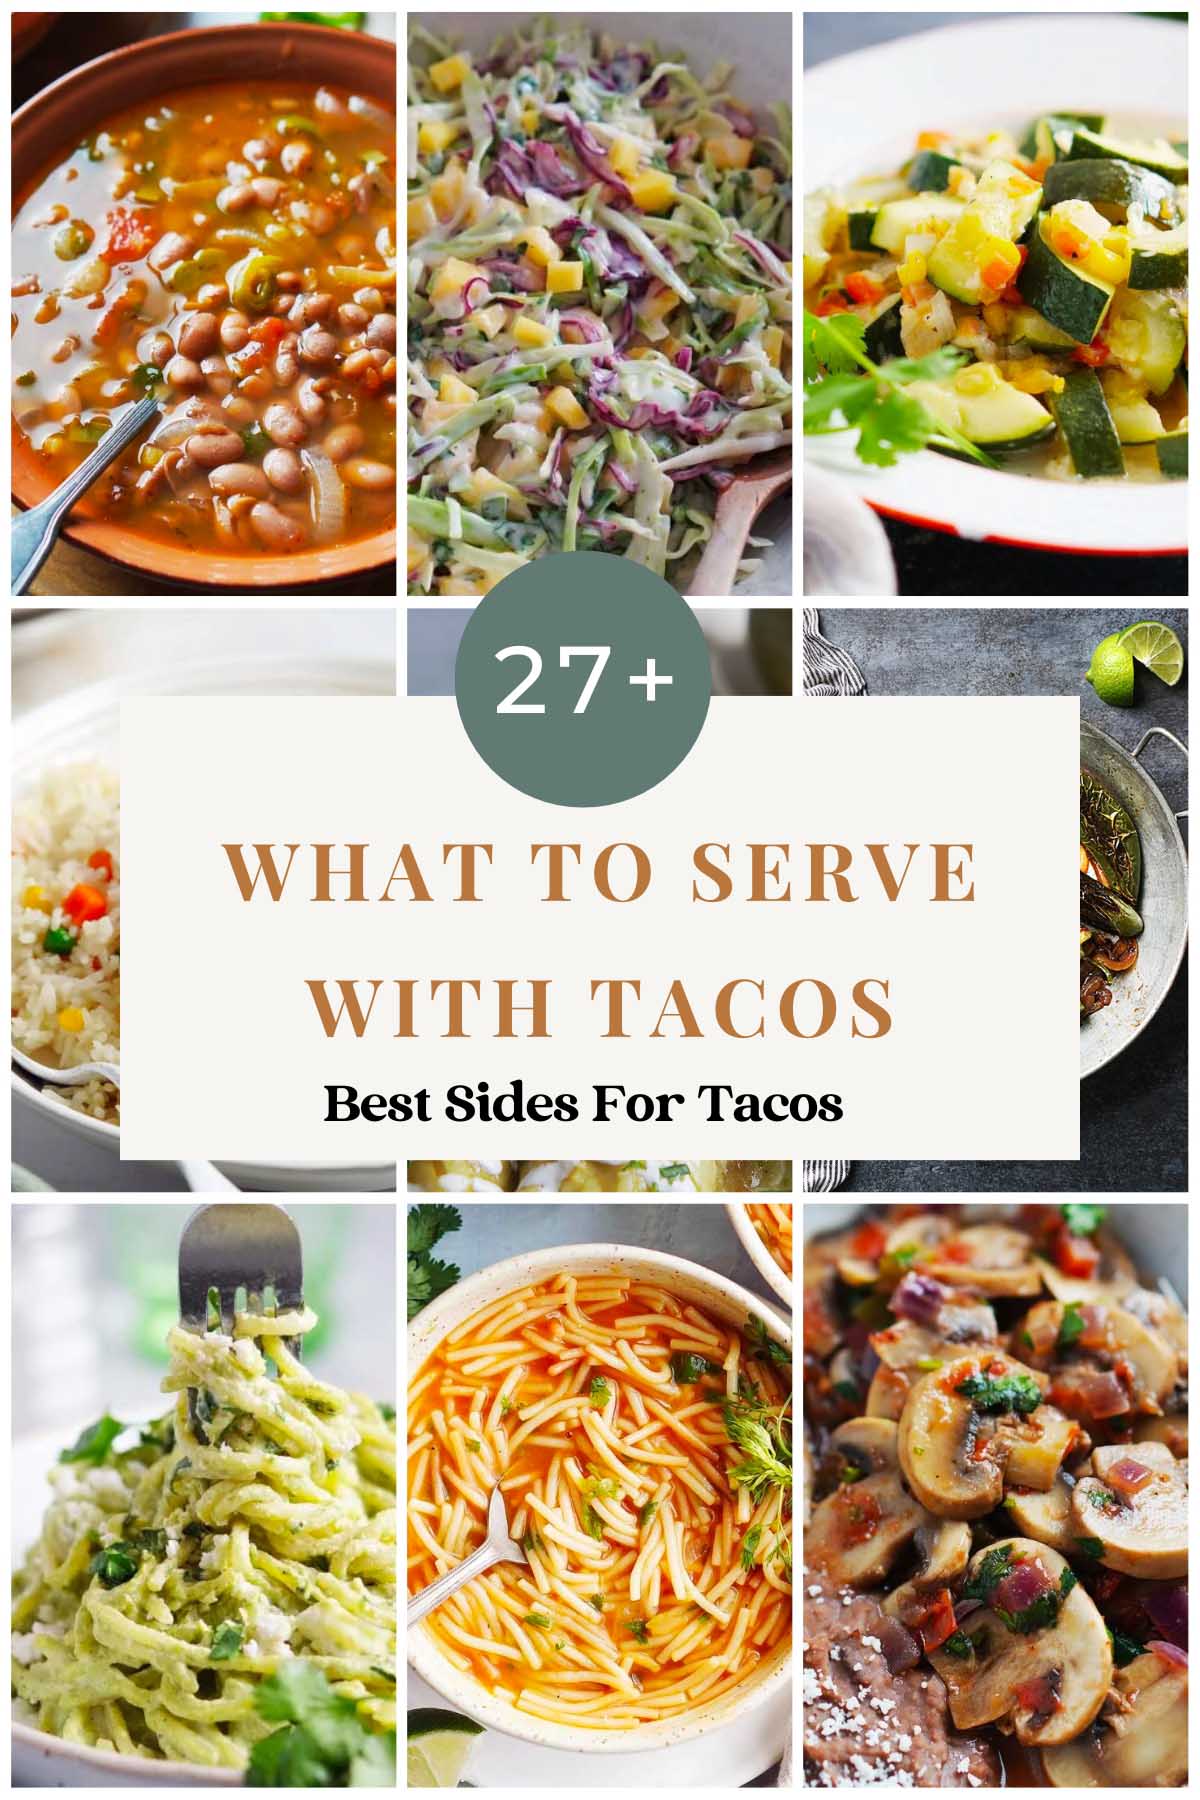 What To Serve With Tacos (Best Side Dishes & More)